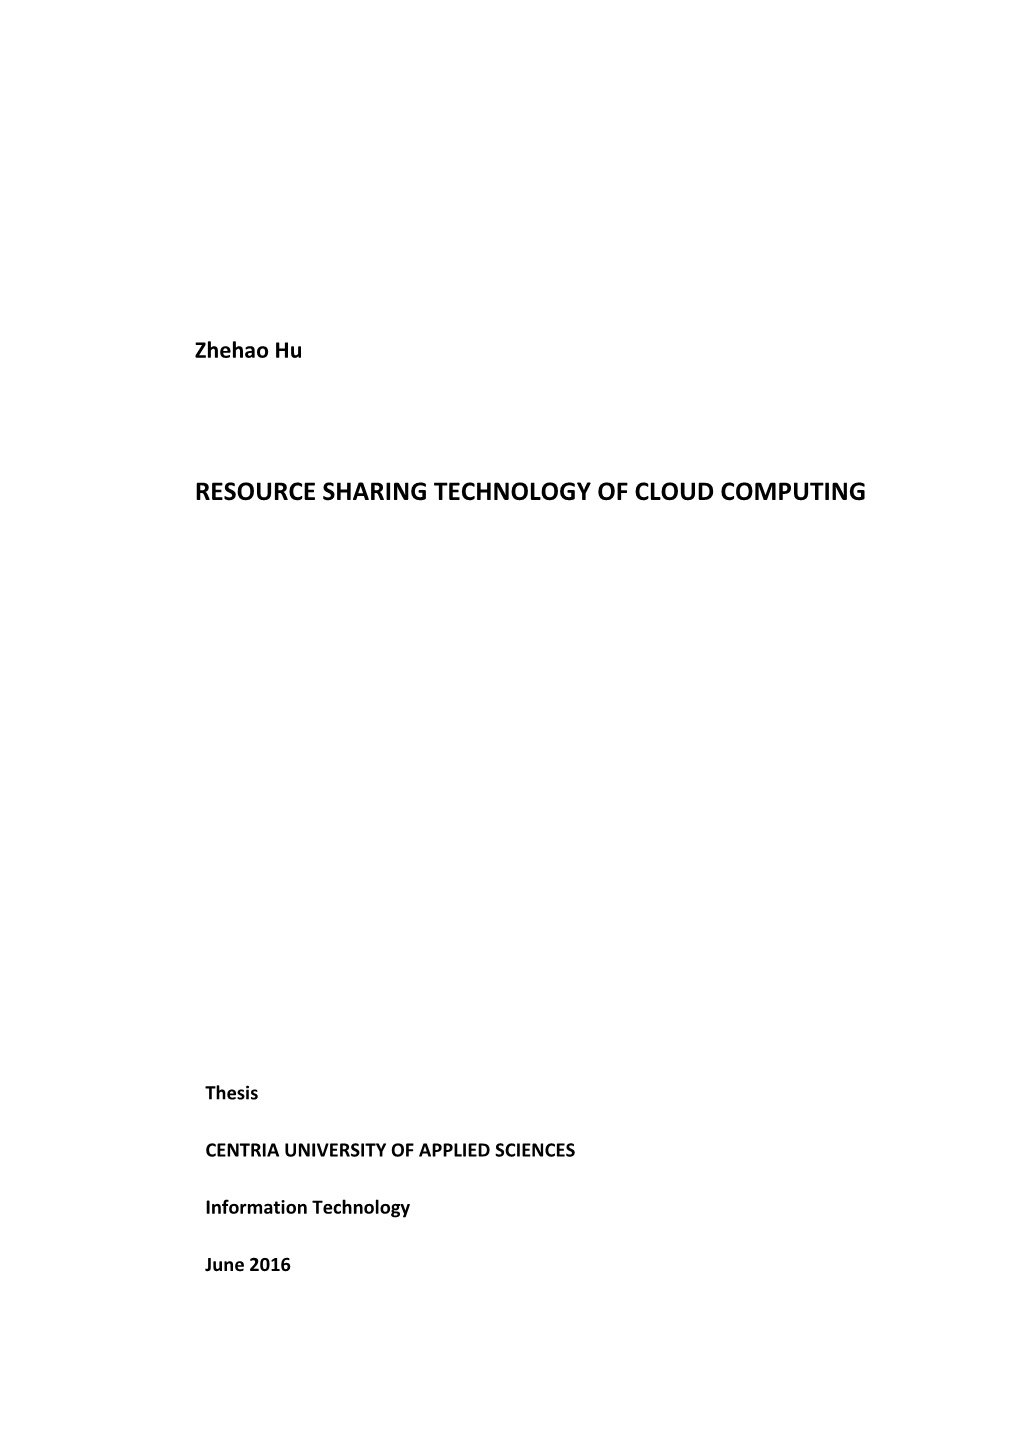 Resource Sharing Technology of Cloud Computing